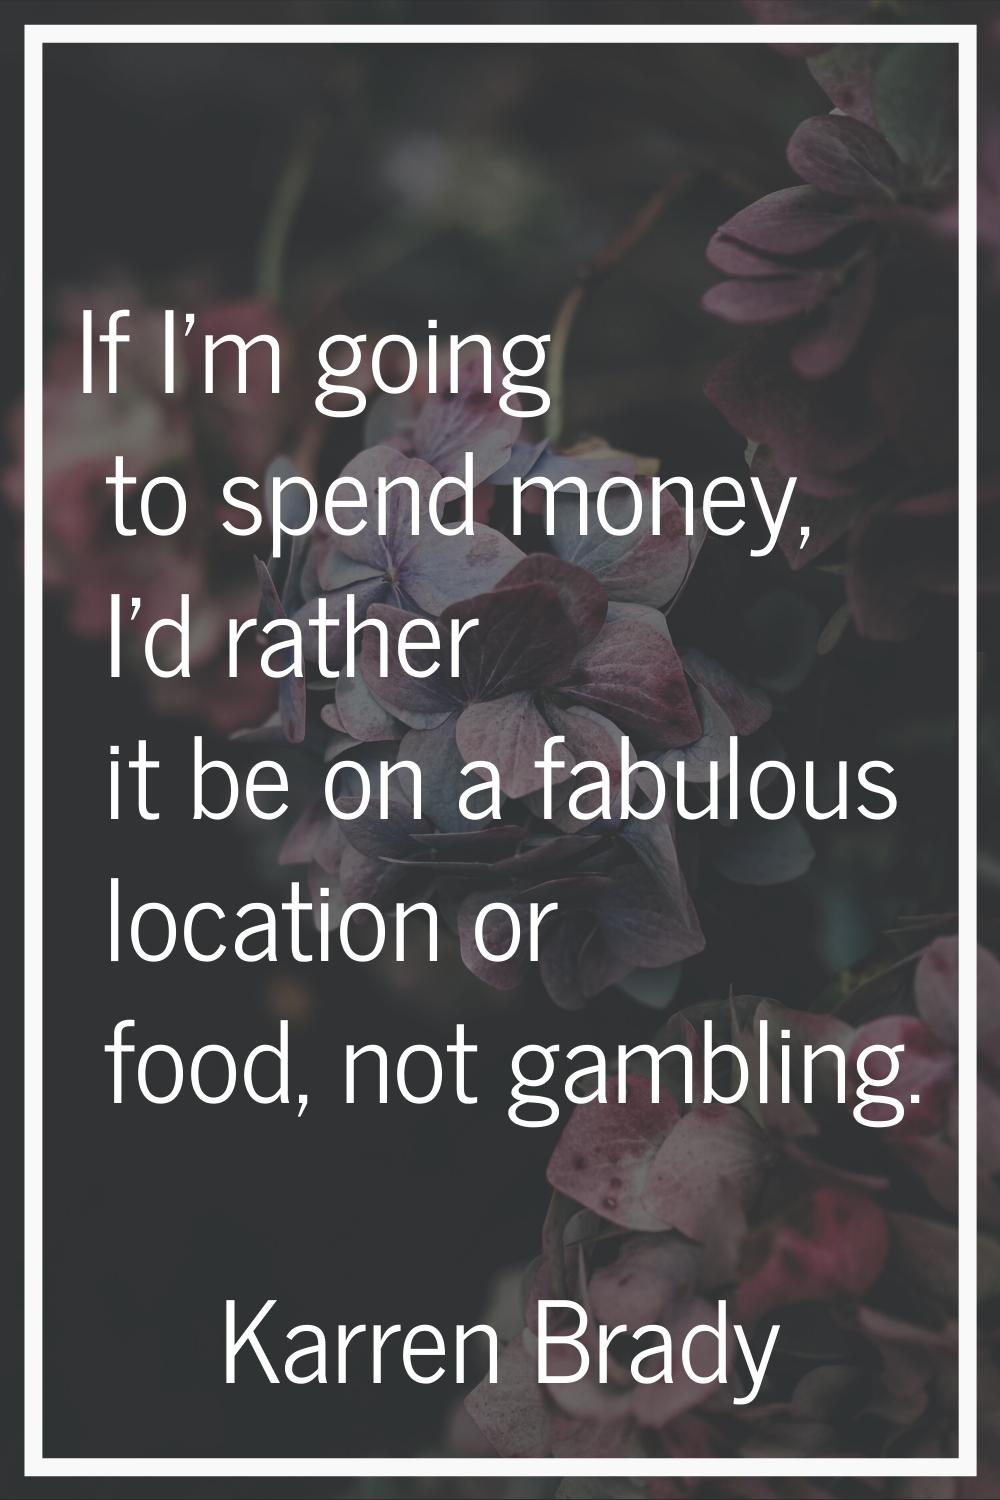 If I'm going to spend money, I'd rather it be on a fabulous location or food, not gambling.